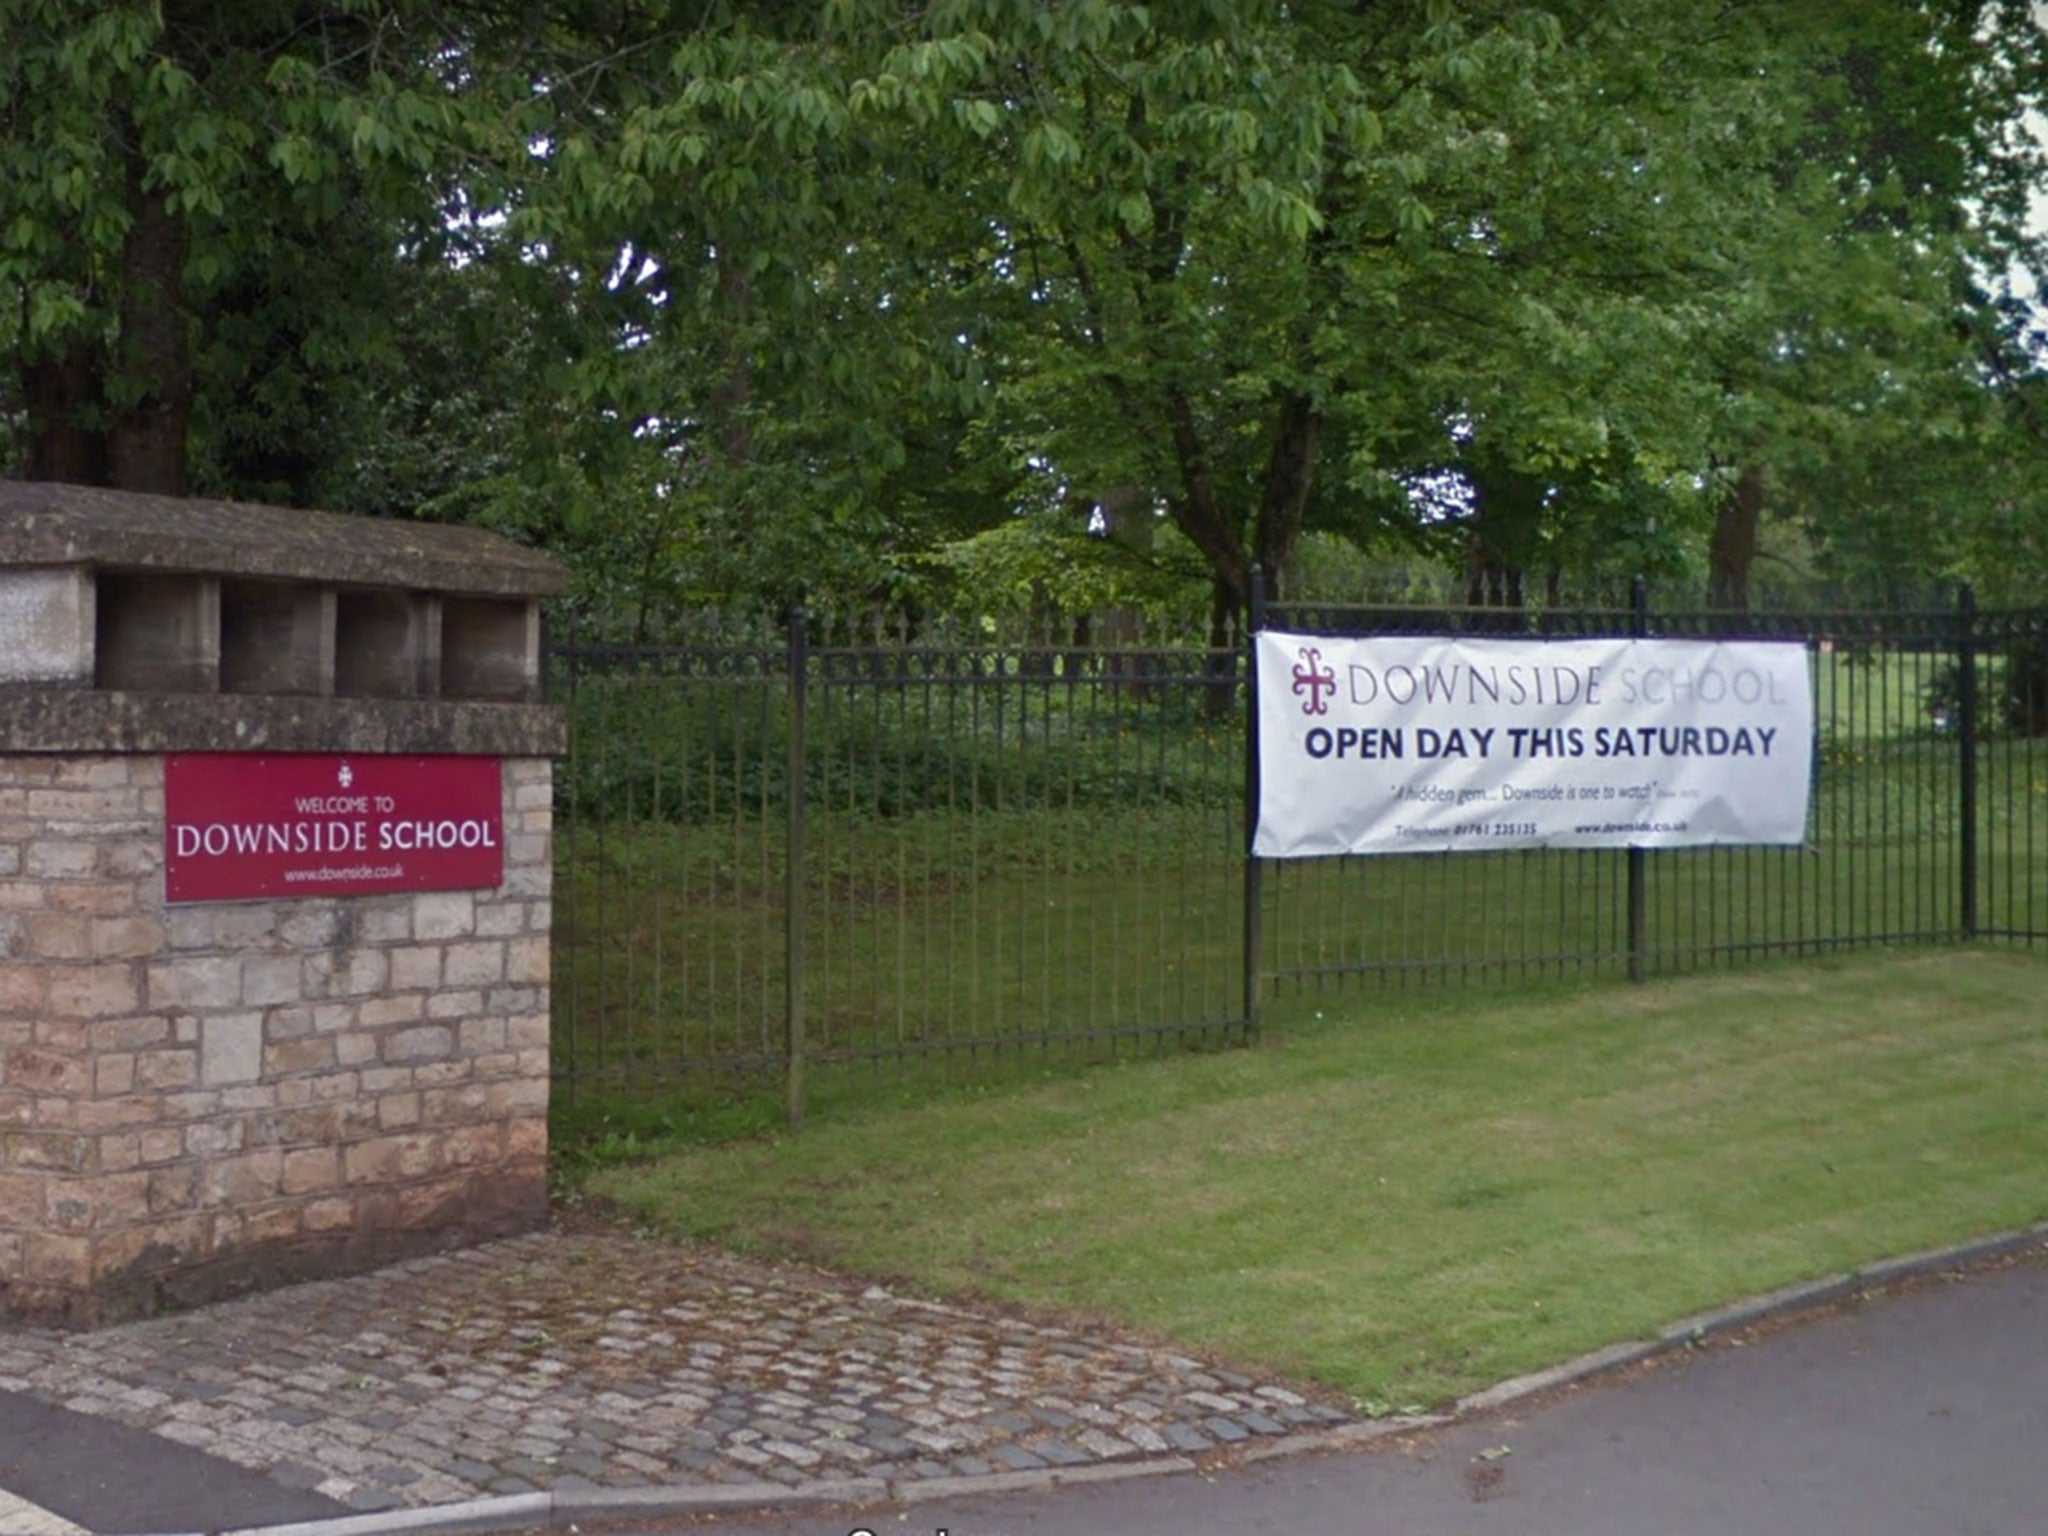 Children as young as 11 were abused at Downside School in Somerset, the inquiry found